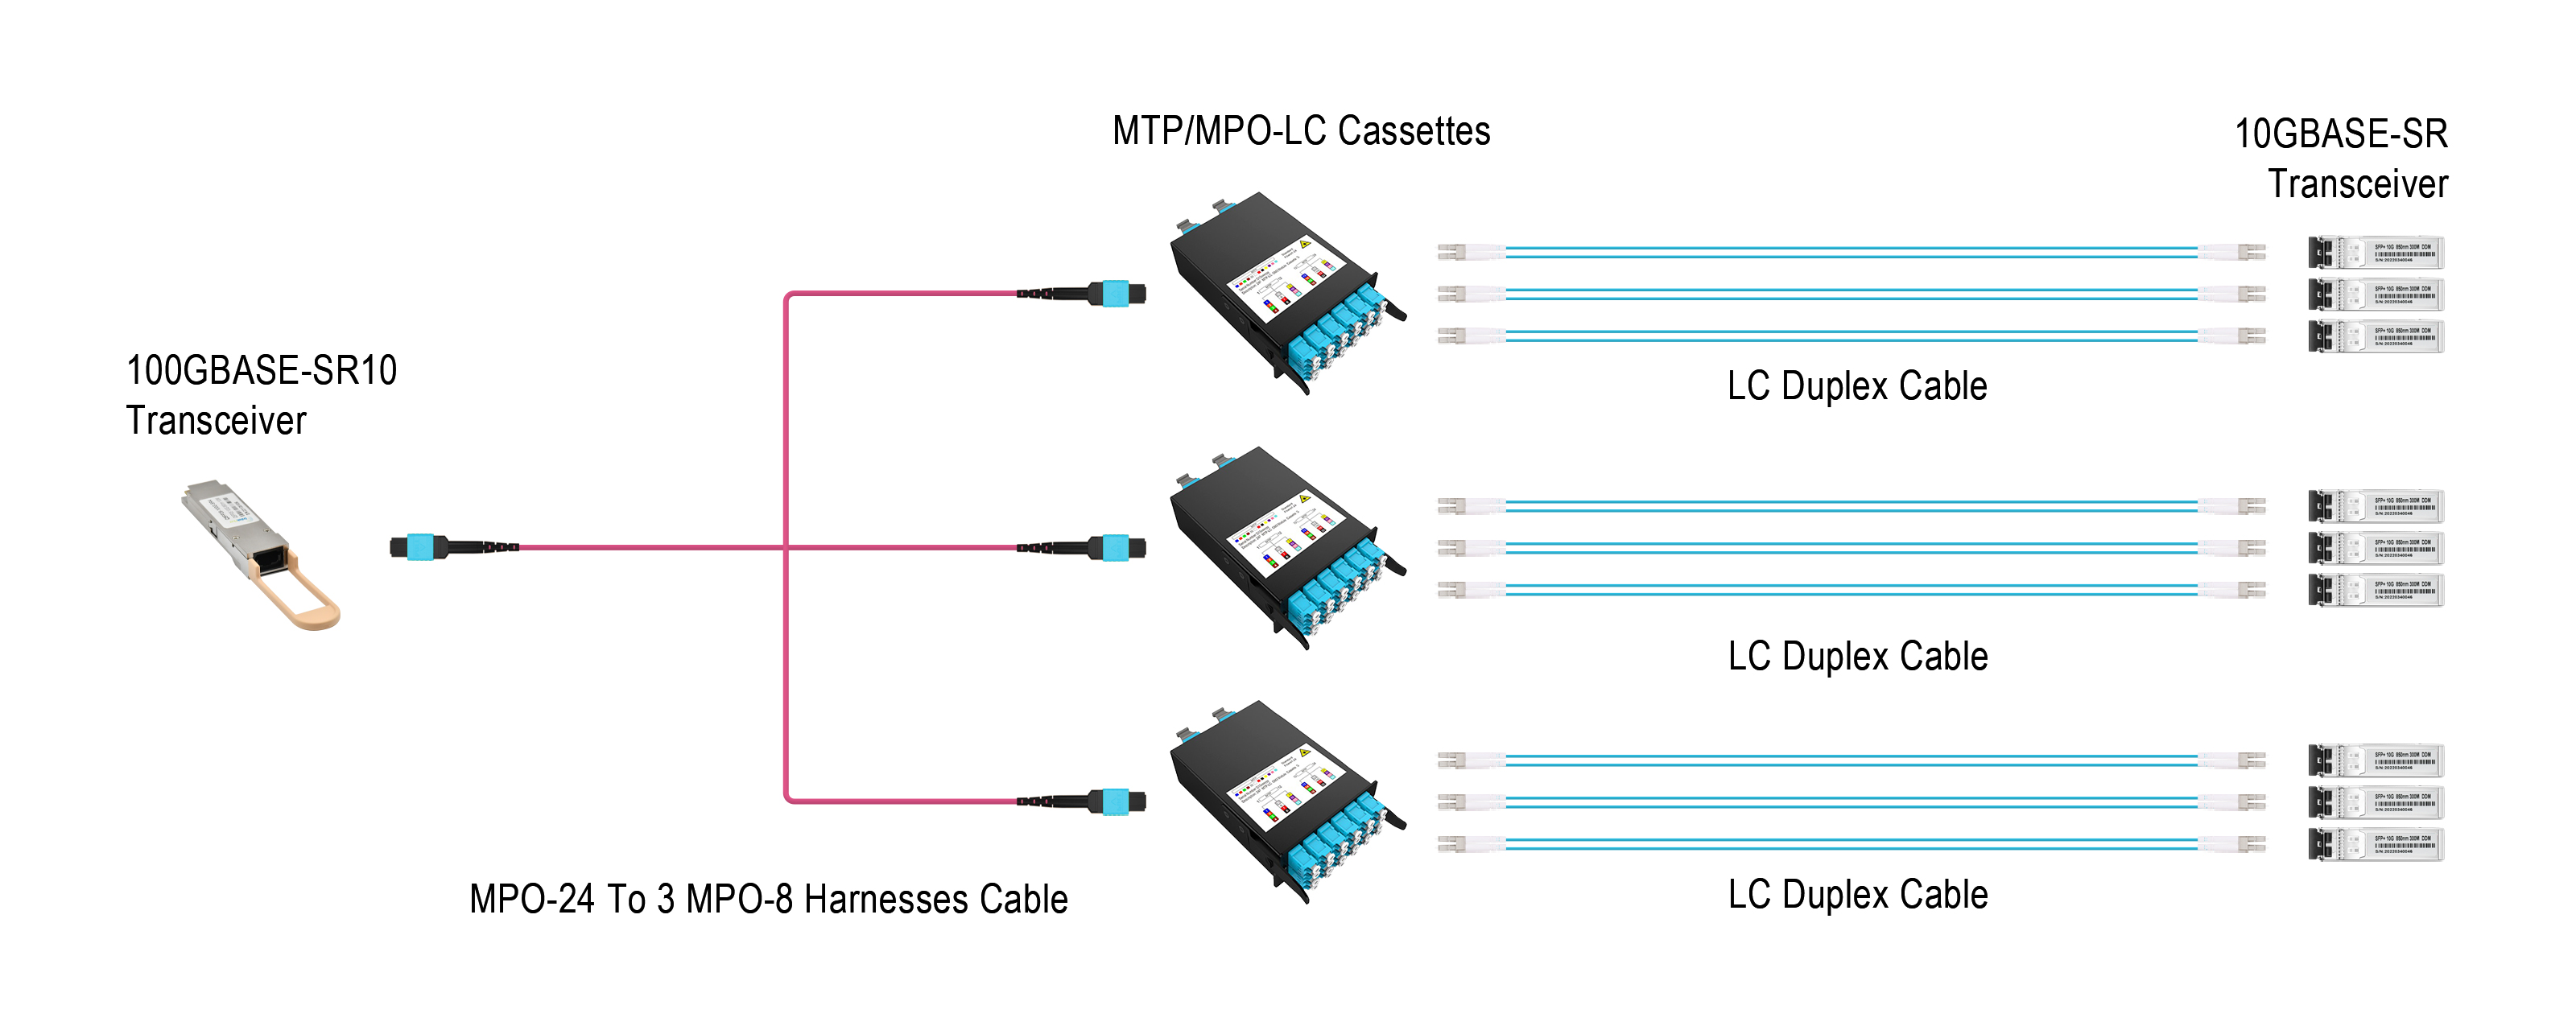 MPO/MTP Fiber Optic Patch Cable Connectivity Solutions